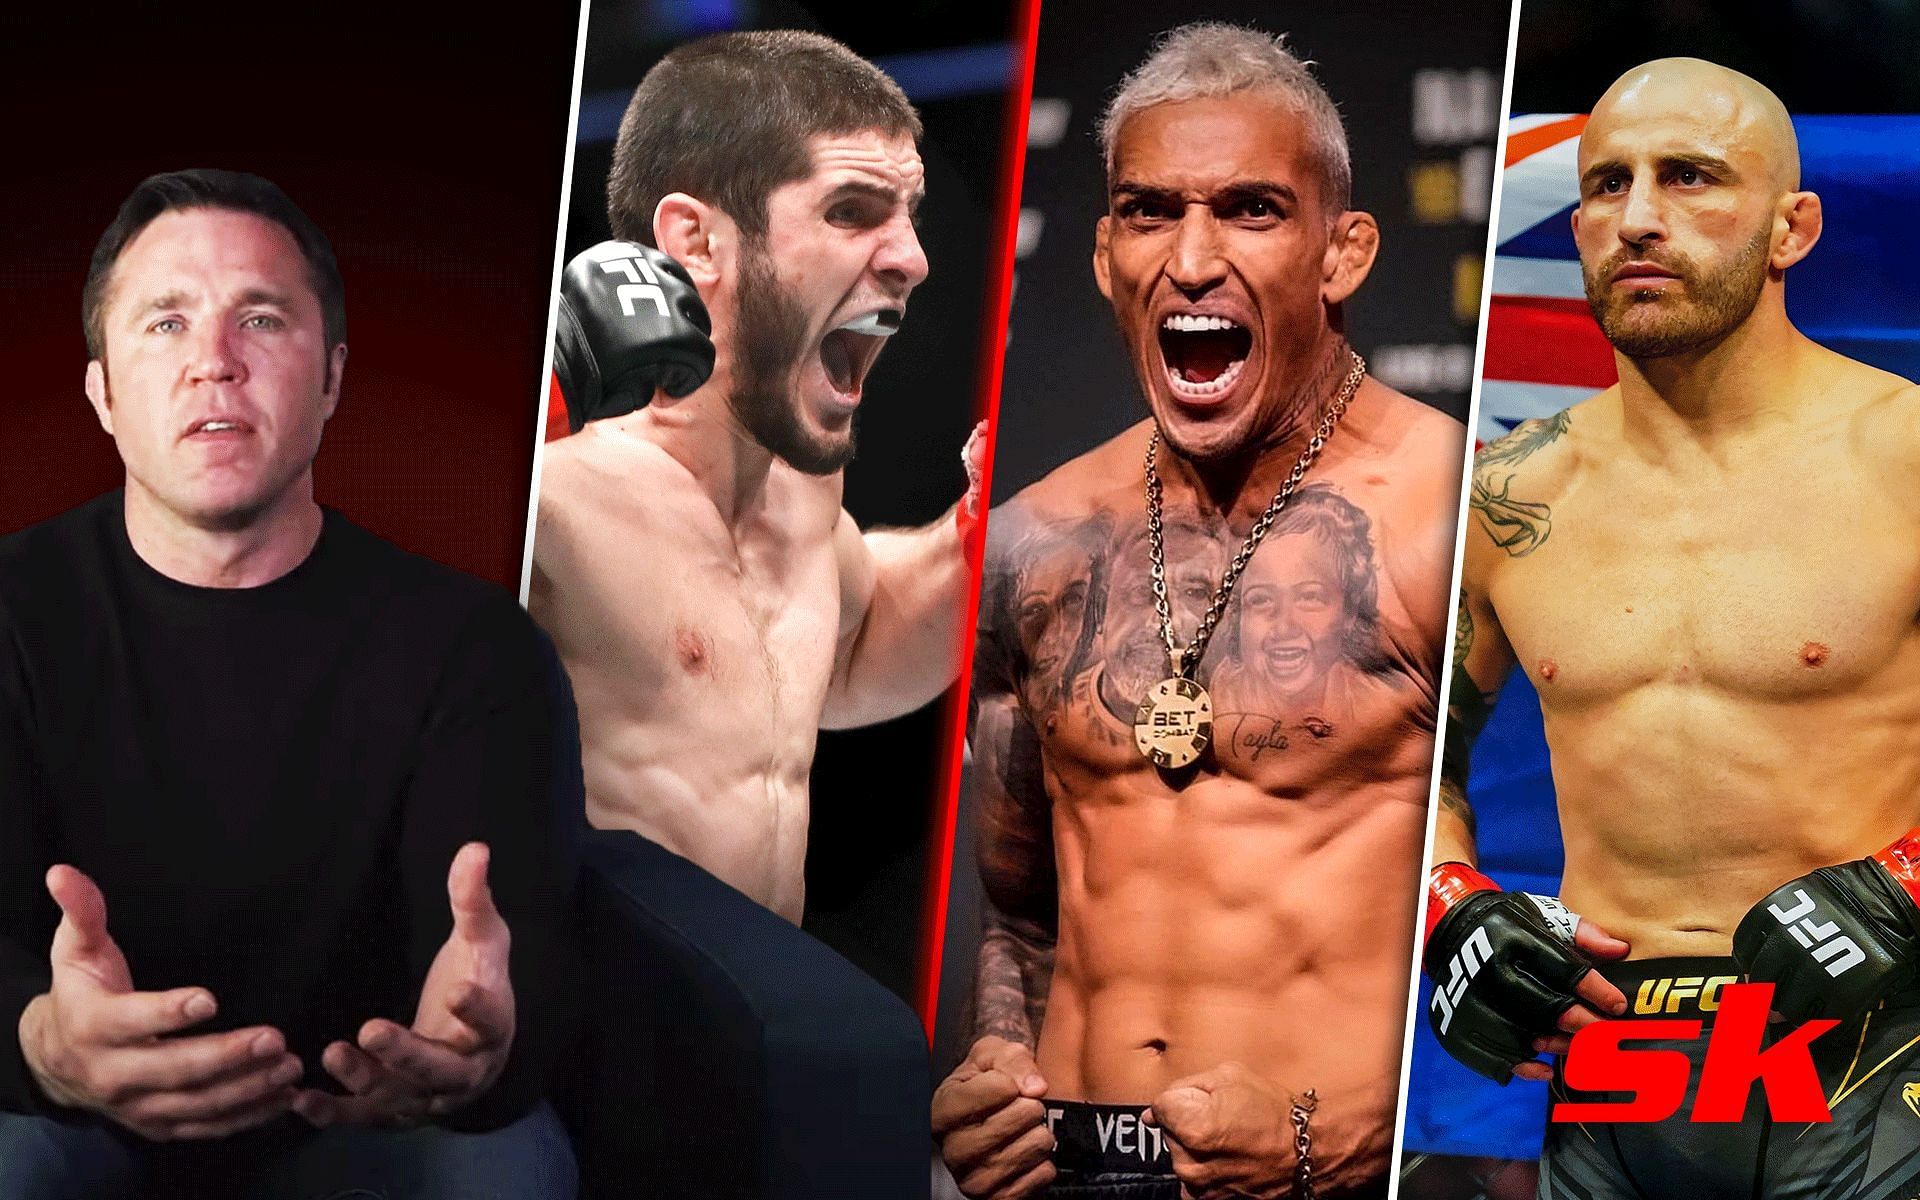 Chael Sonnen (left), Islam Makhachev (center left), Charles Oliveira (center right), and Alexander Volkanovski (right). [Images courtesy: left image from YouTube Chael Sonnen, center right image from Instagram @charlesdobronxs, and rest of the images from Getty Images]